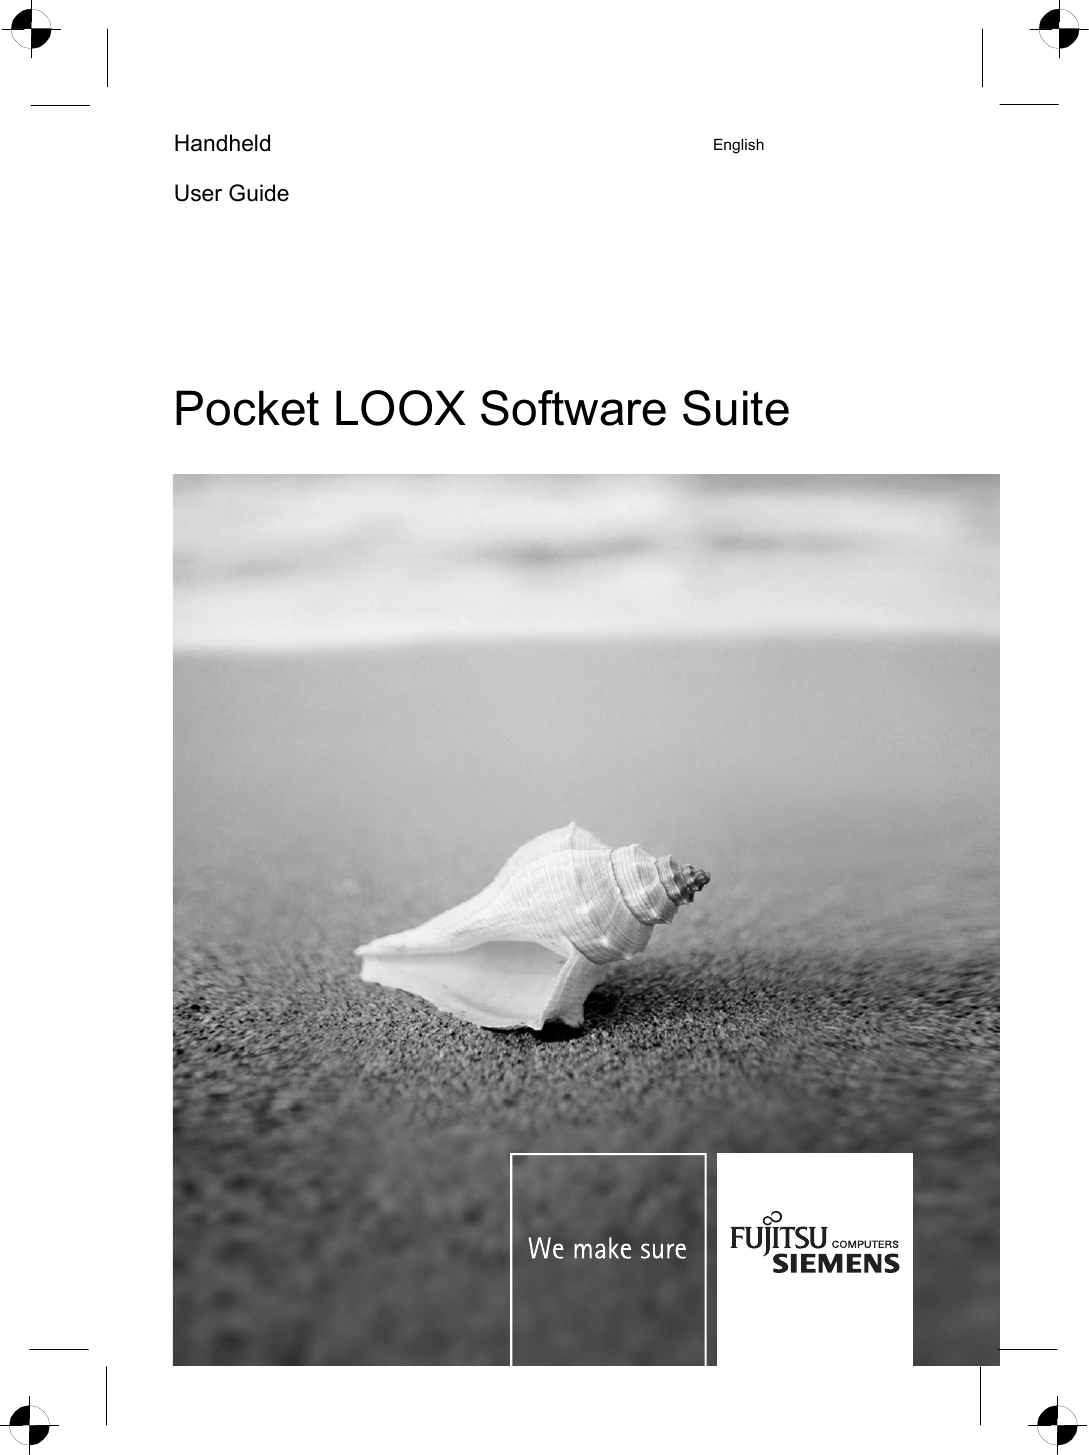      Handheld User Guide English Pocket LOOX Software Suite 